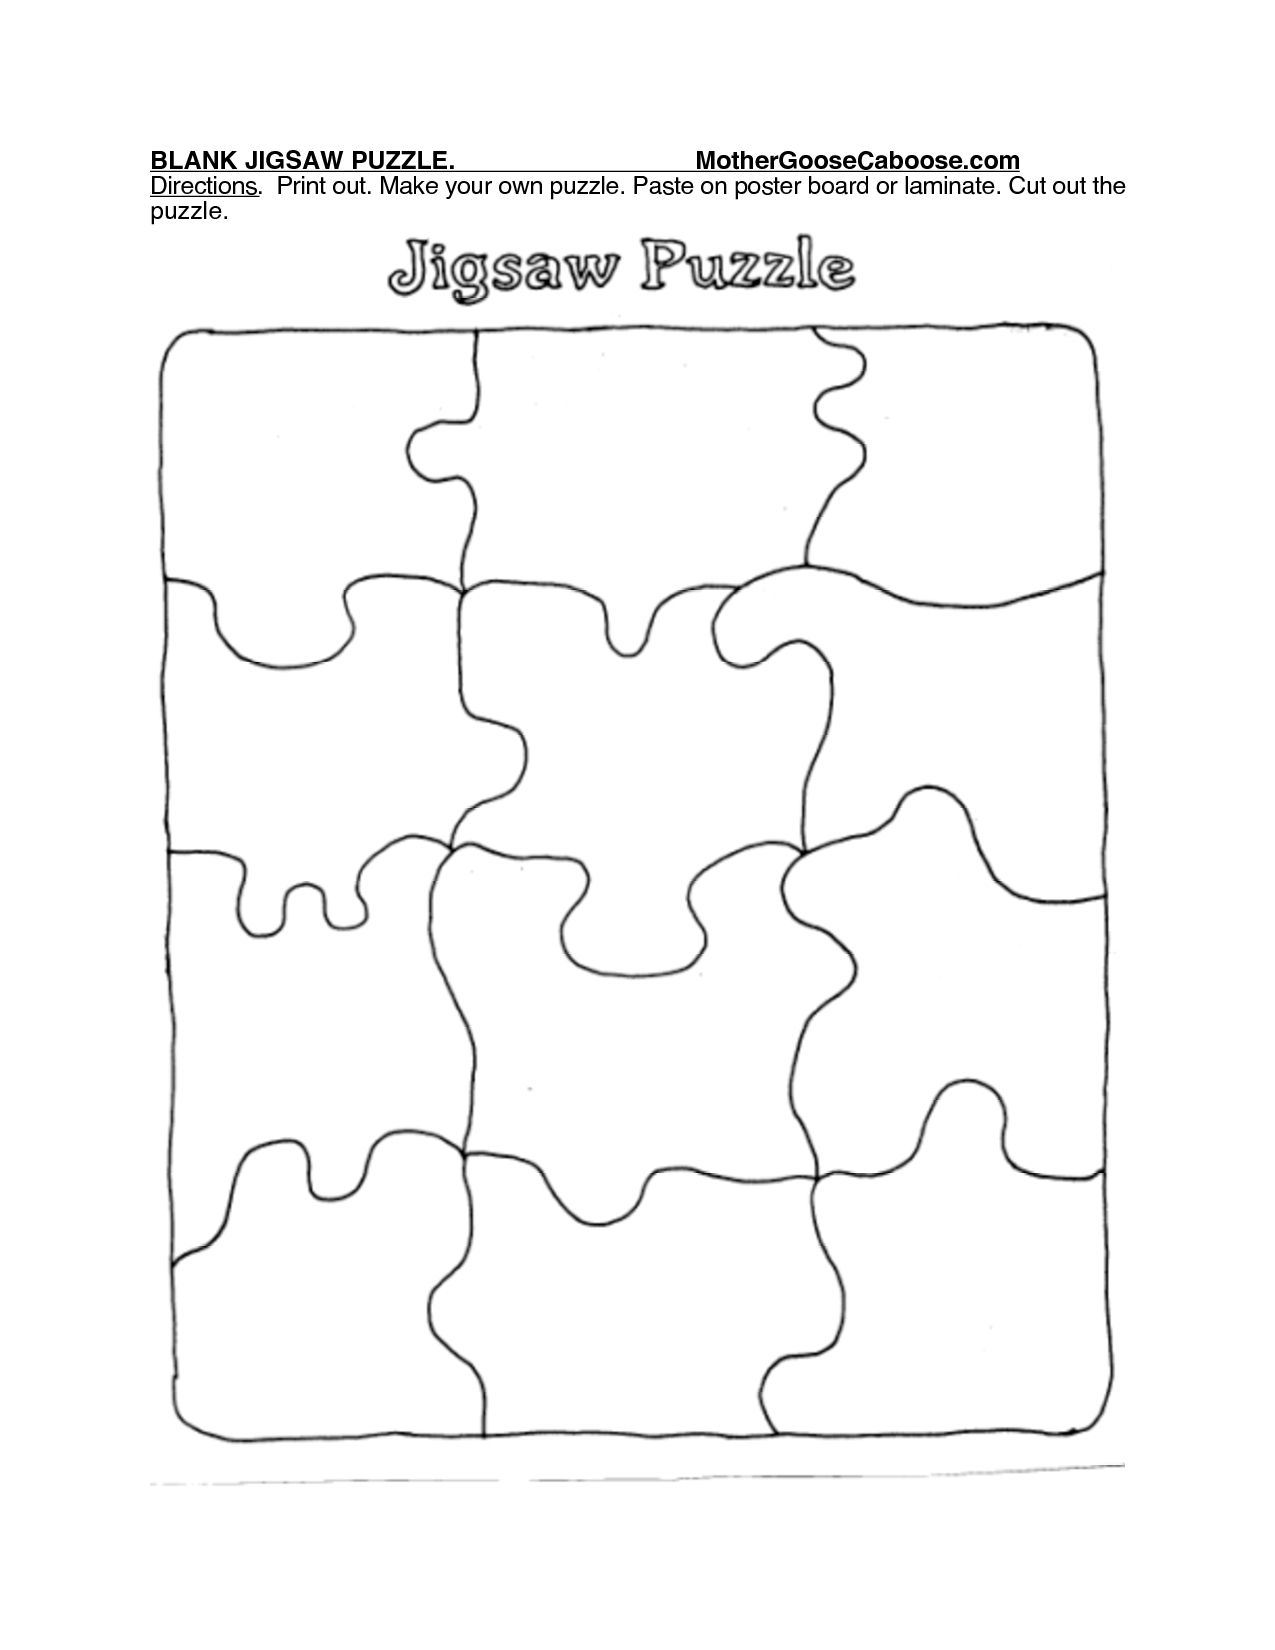 Printable Puzzle Piece Template | Search Results | New Calendar - Printable Jigsaw Puzzles Pdf